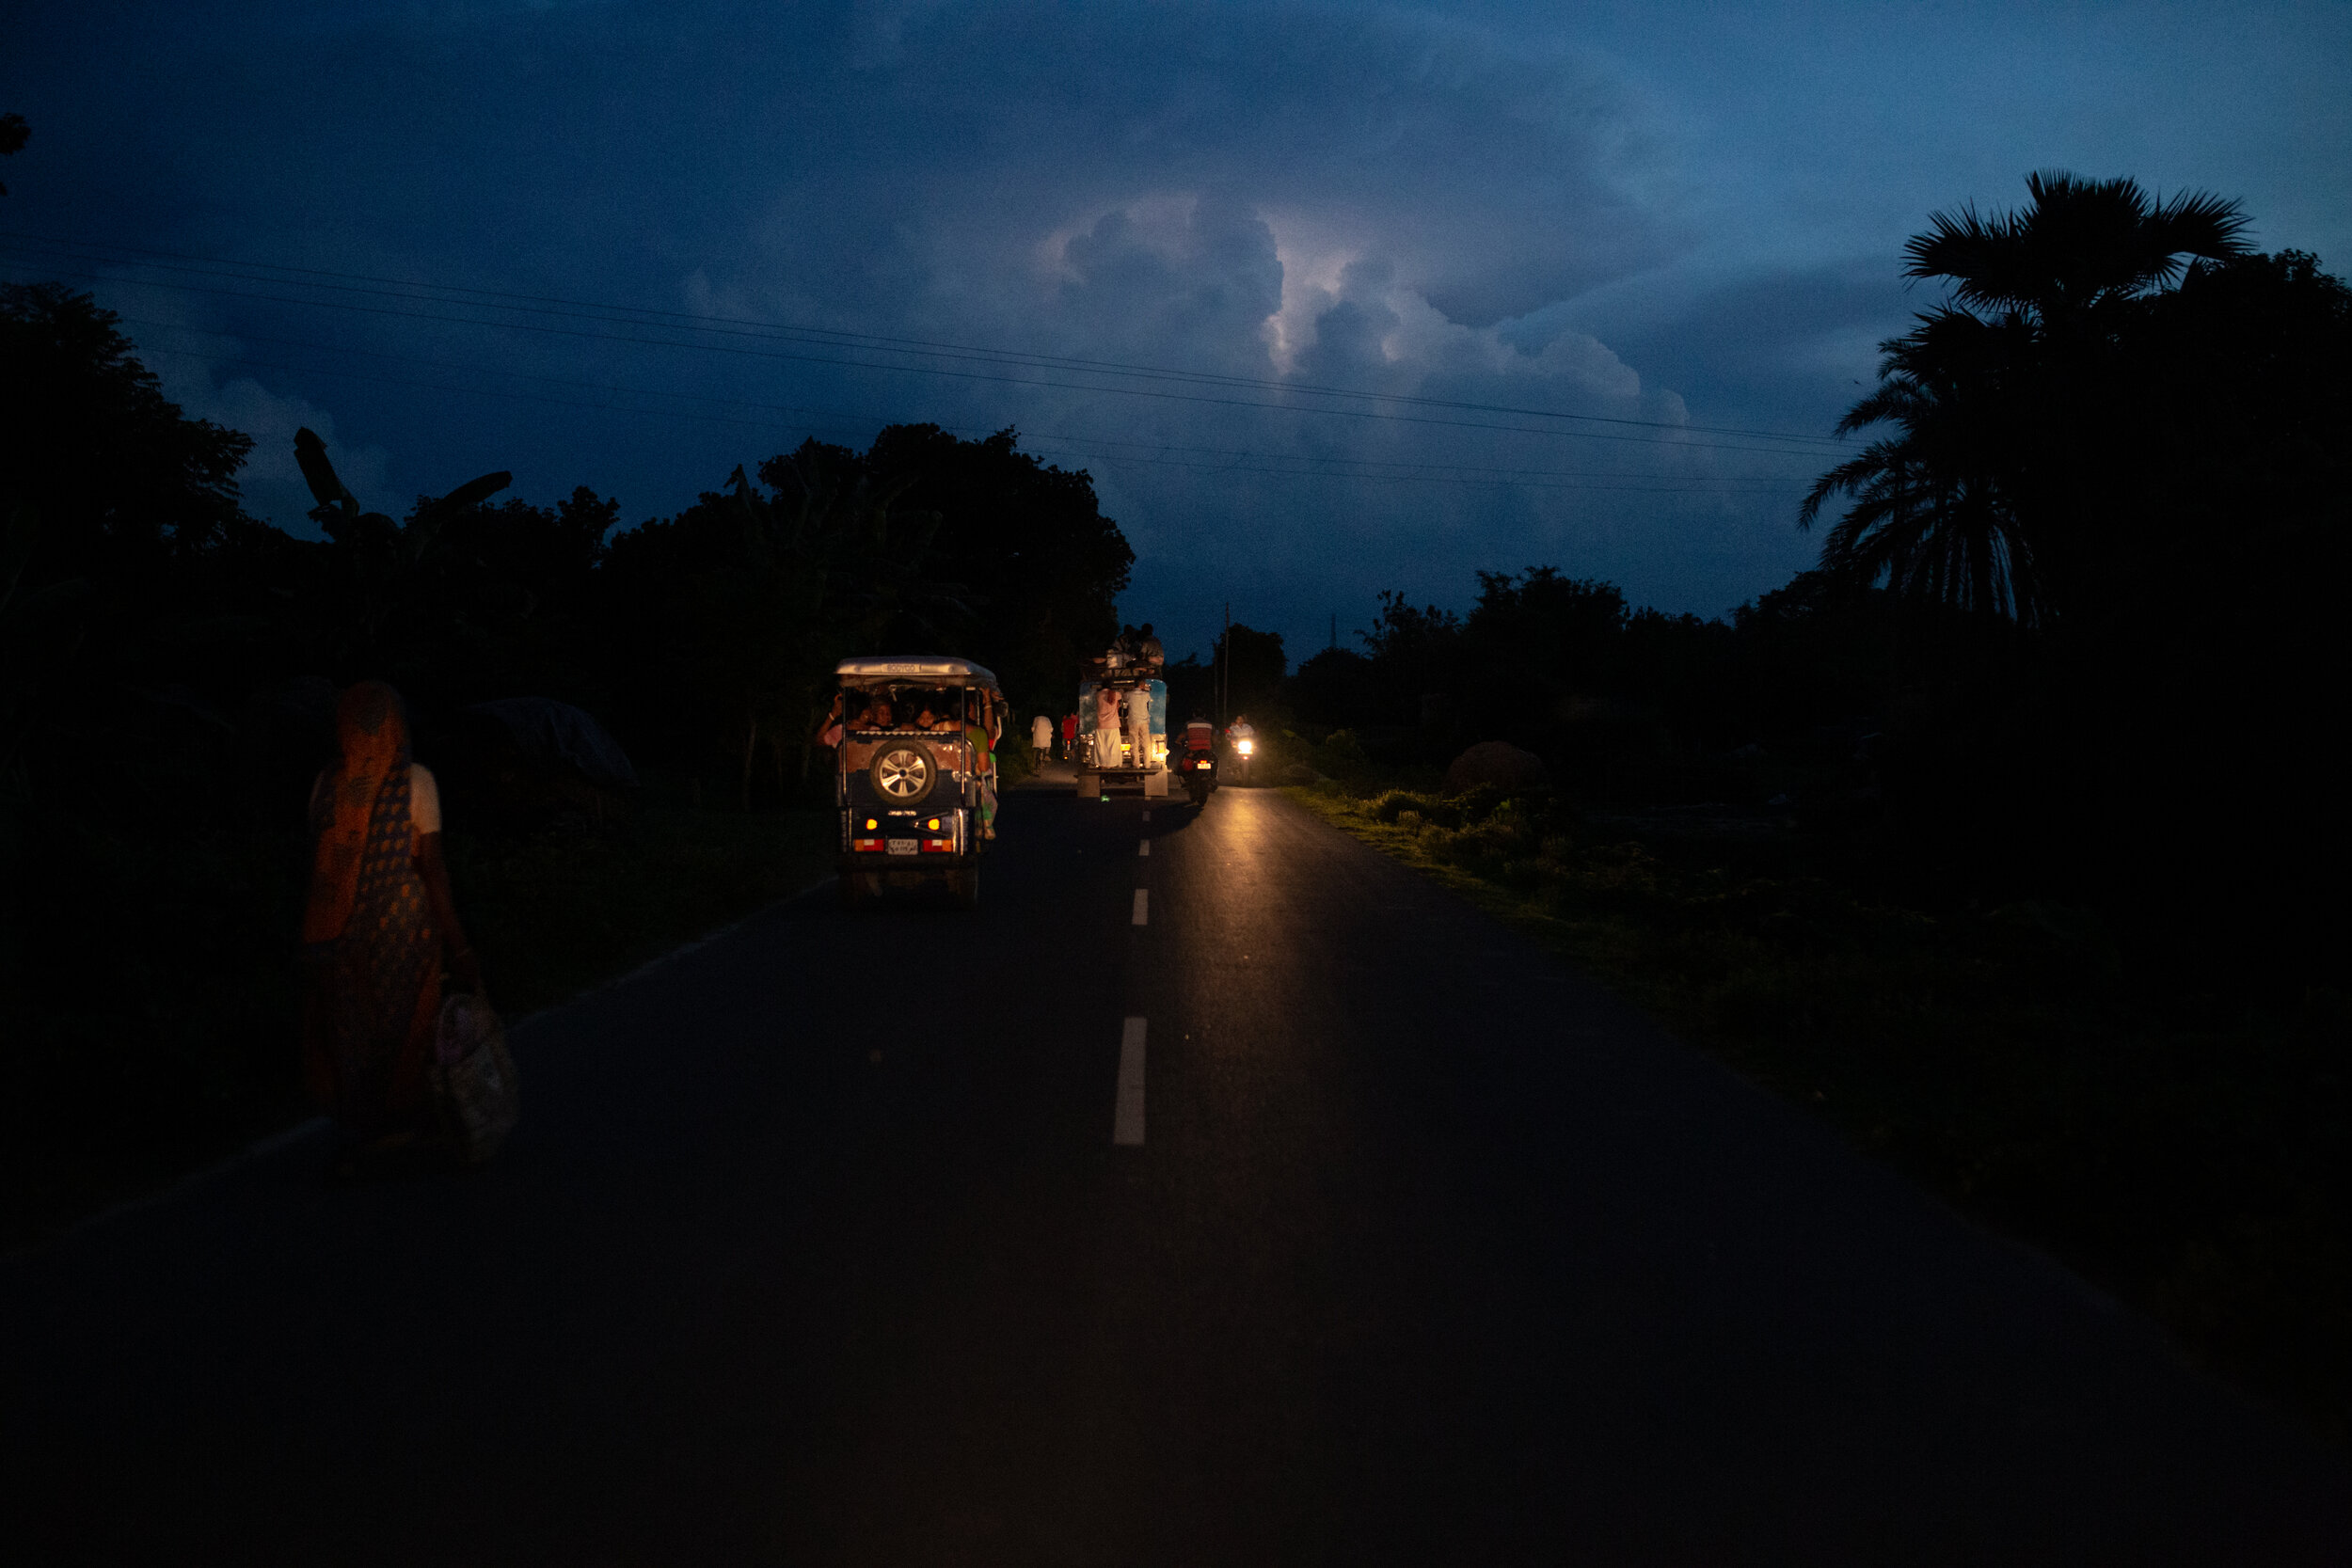  People make their way home during a monsoon storm in Uttar Dinajpur, West Bengal 